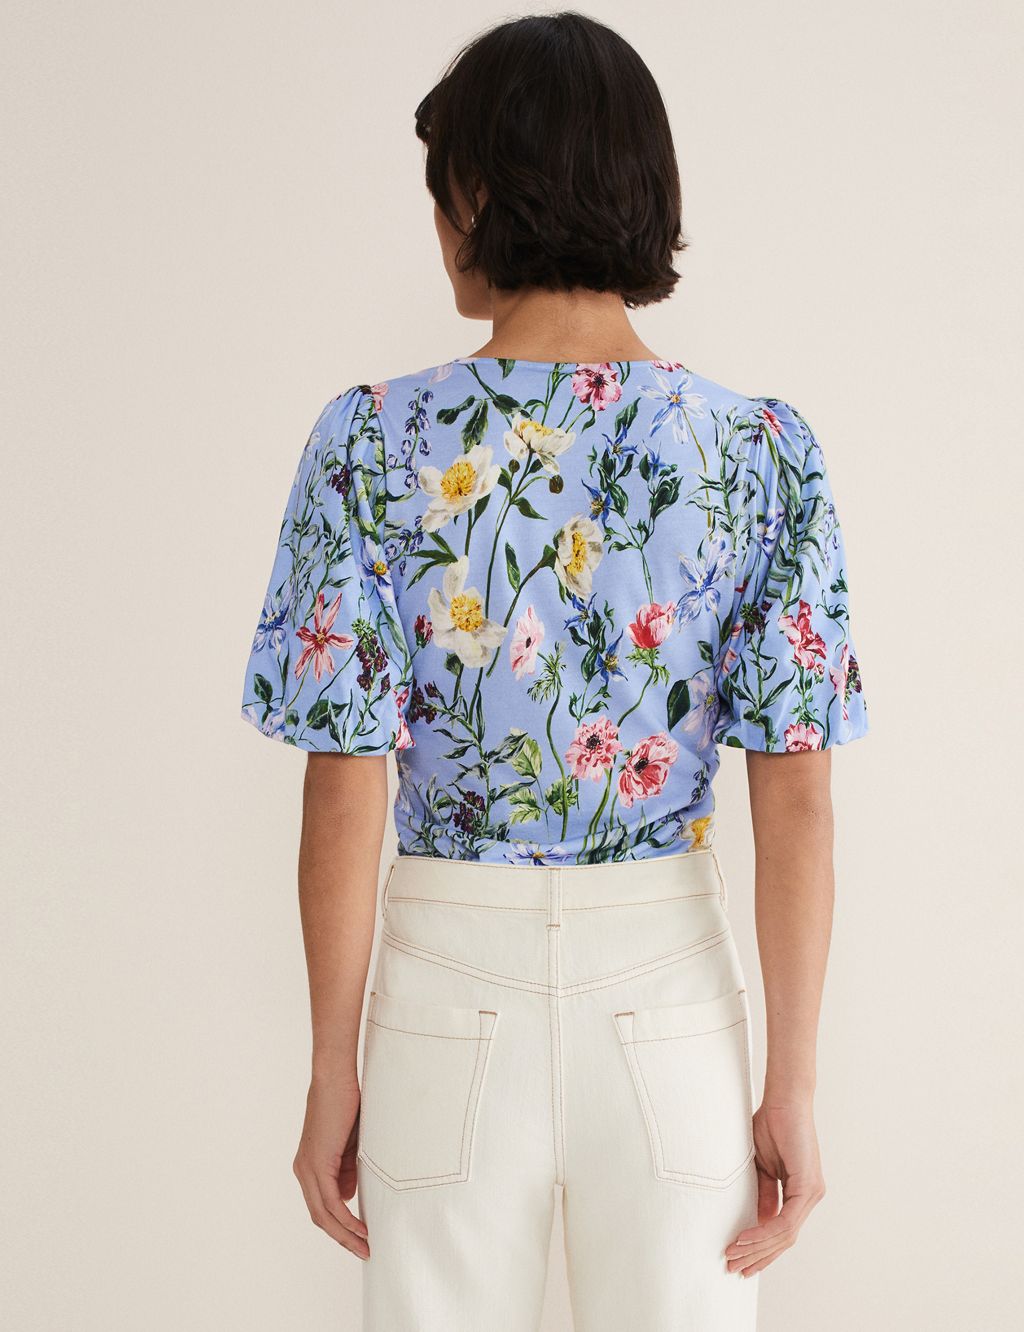 Cotton Modal Blend Floral Puff Sleeve Top image 3